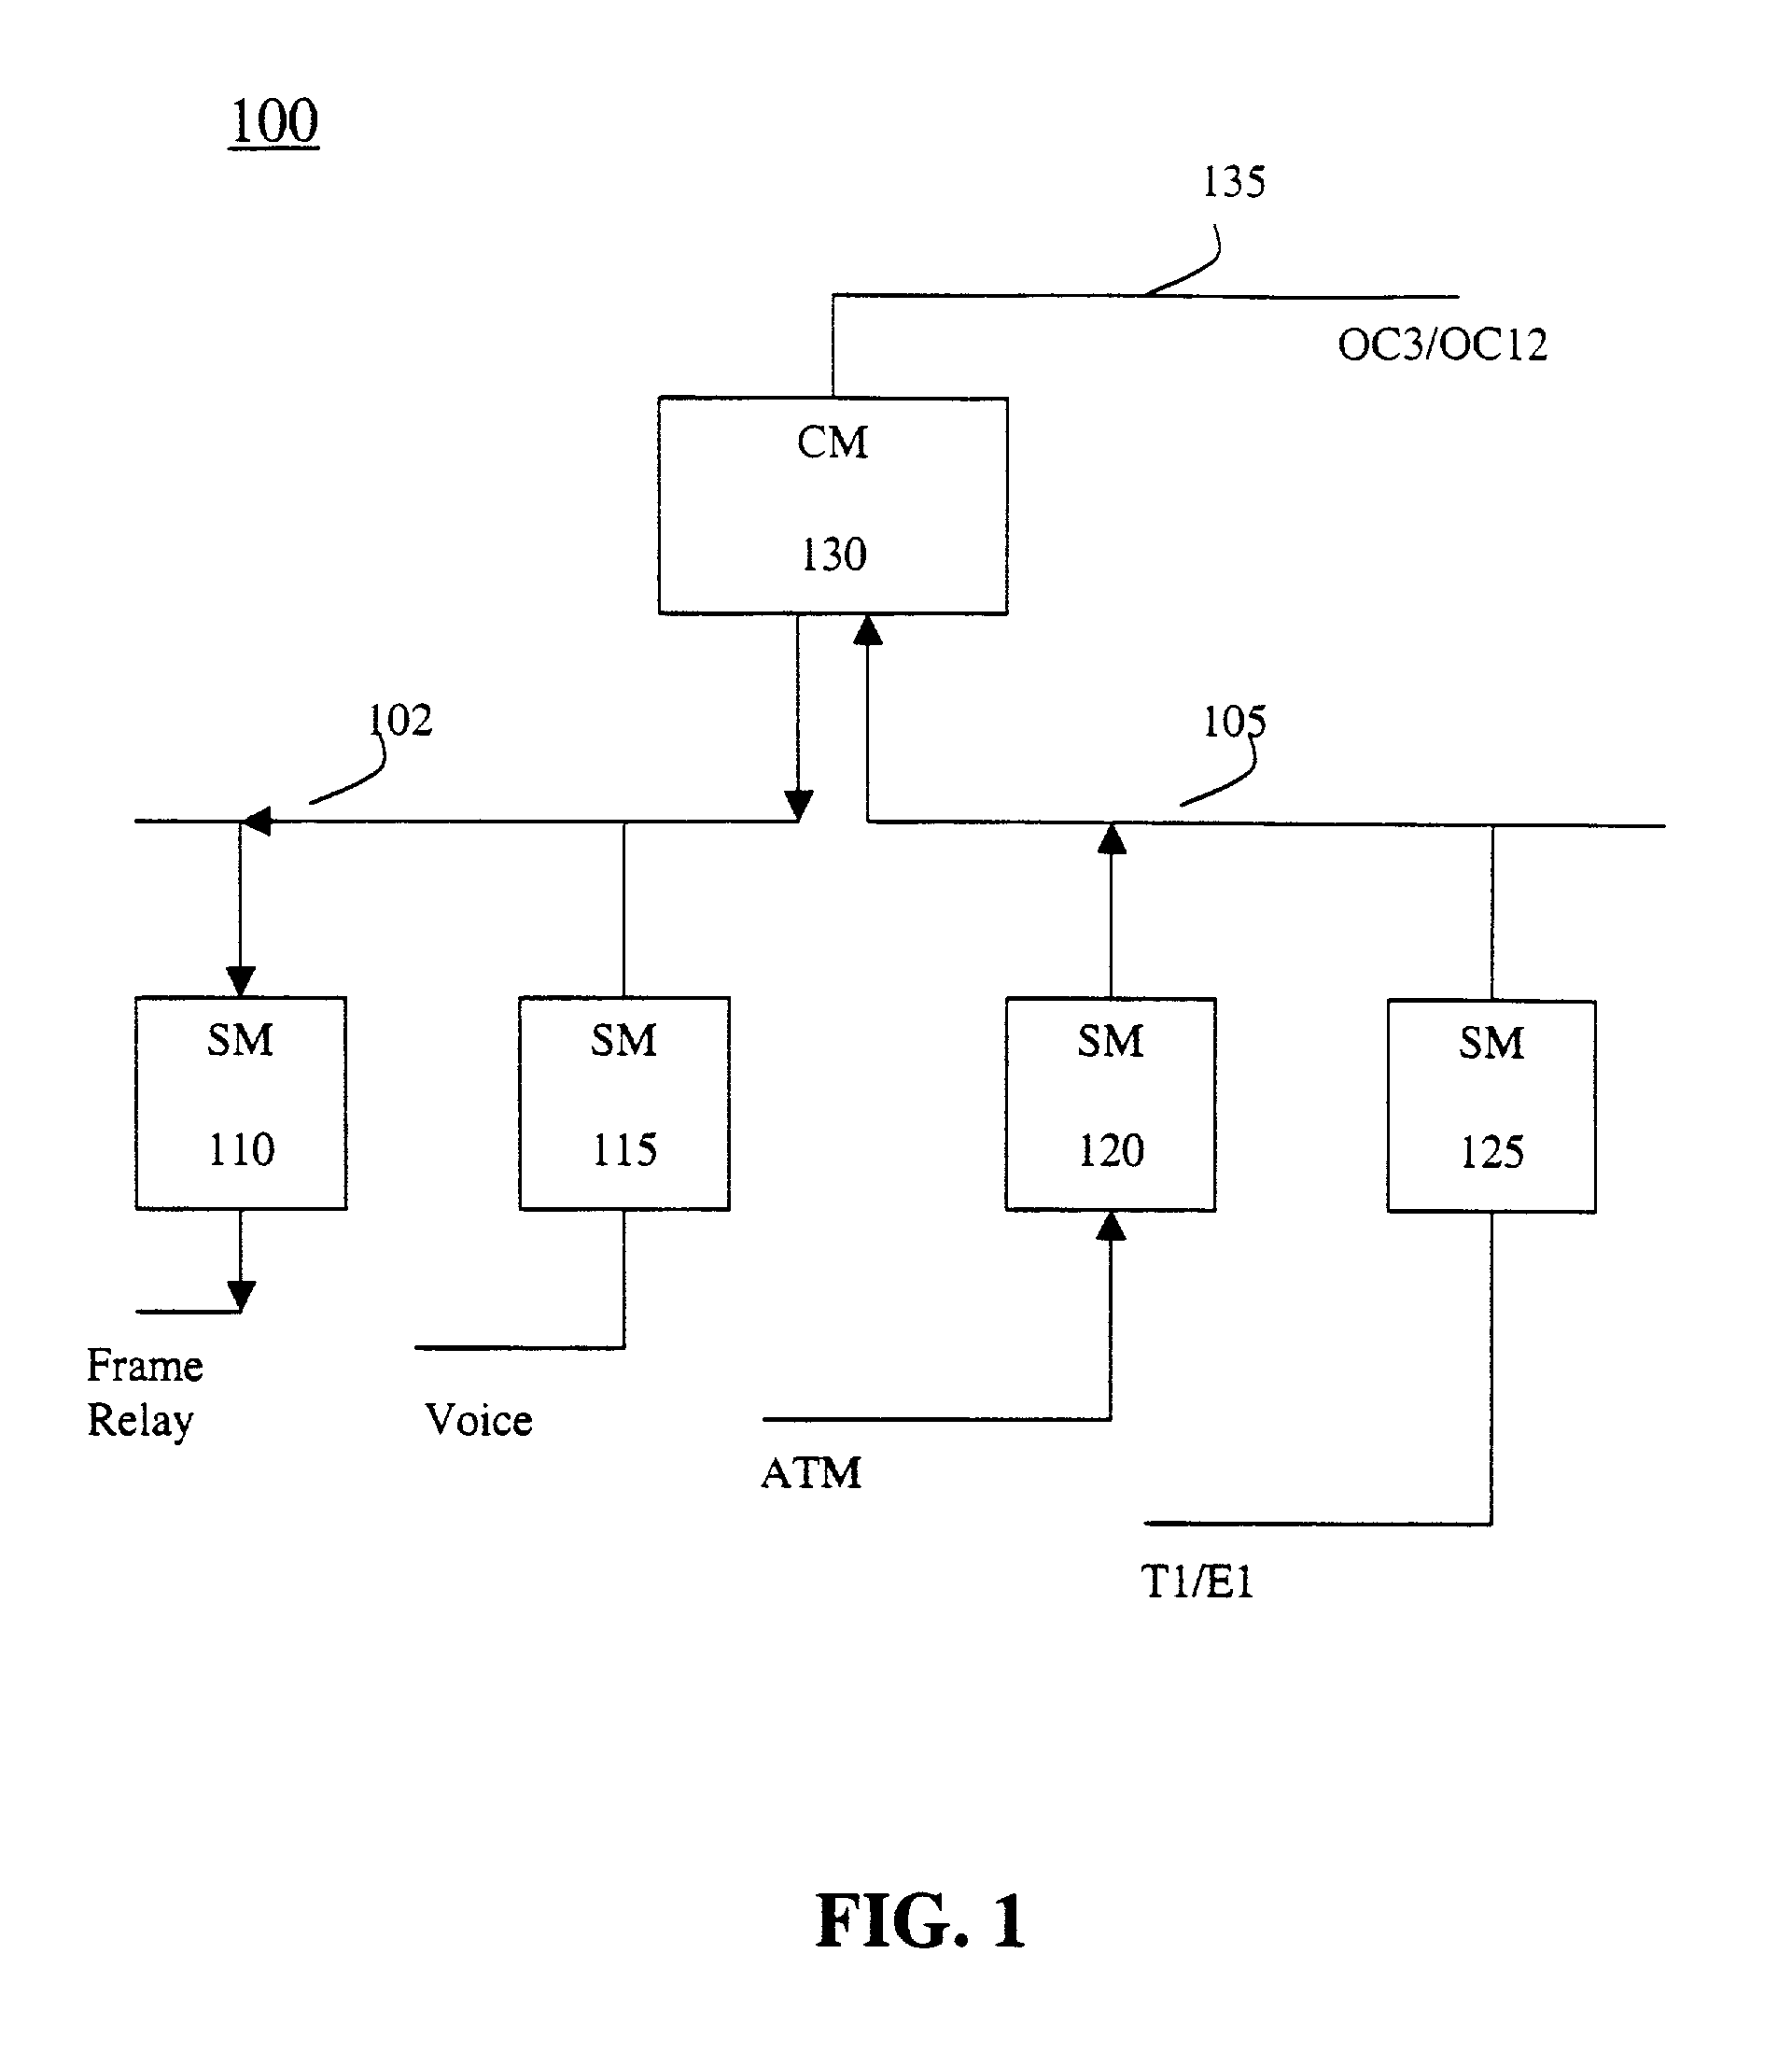 Method for capturing core dump of a service module